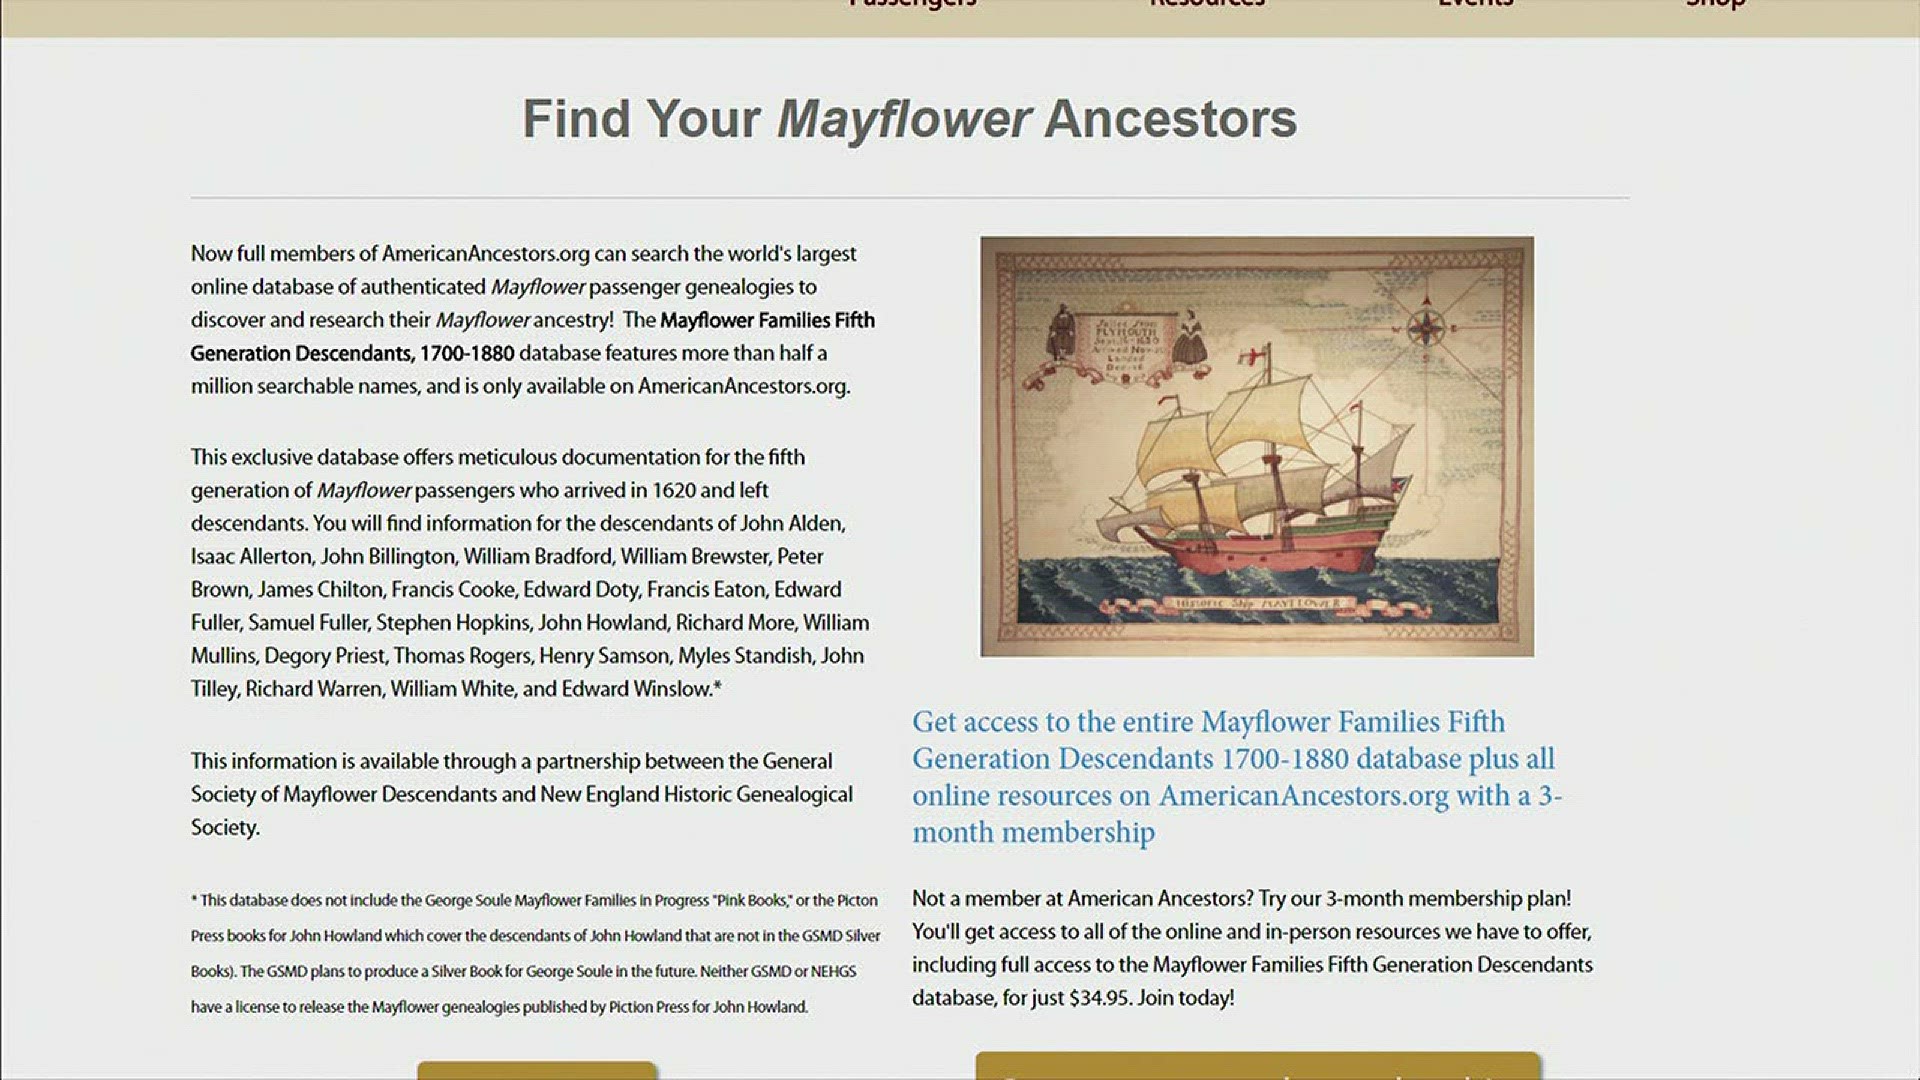 Was One Of Your Ancestors On The Mayflower?